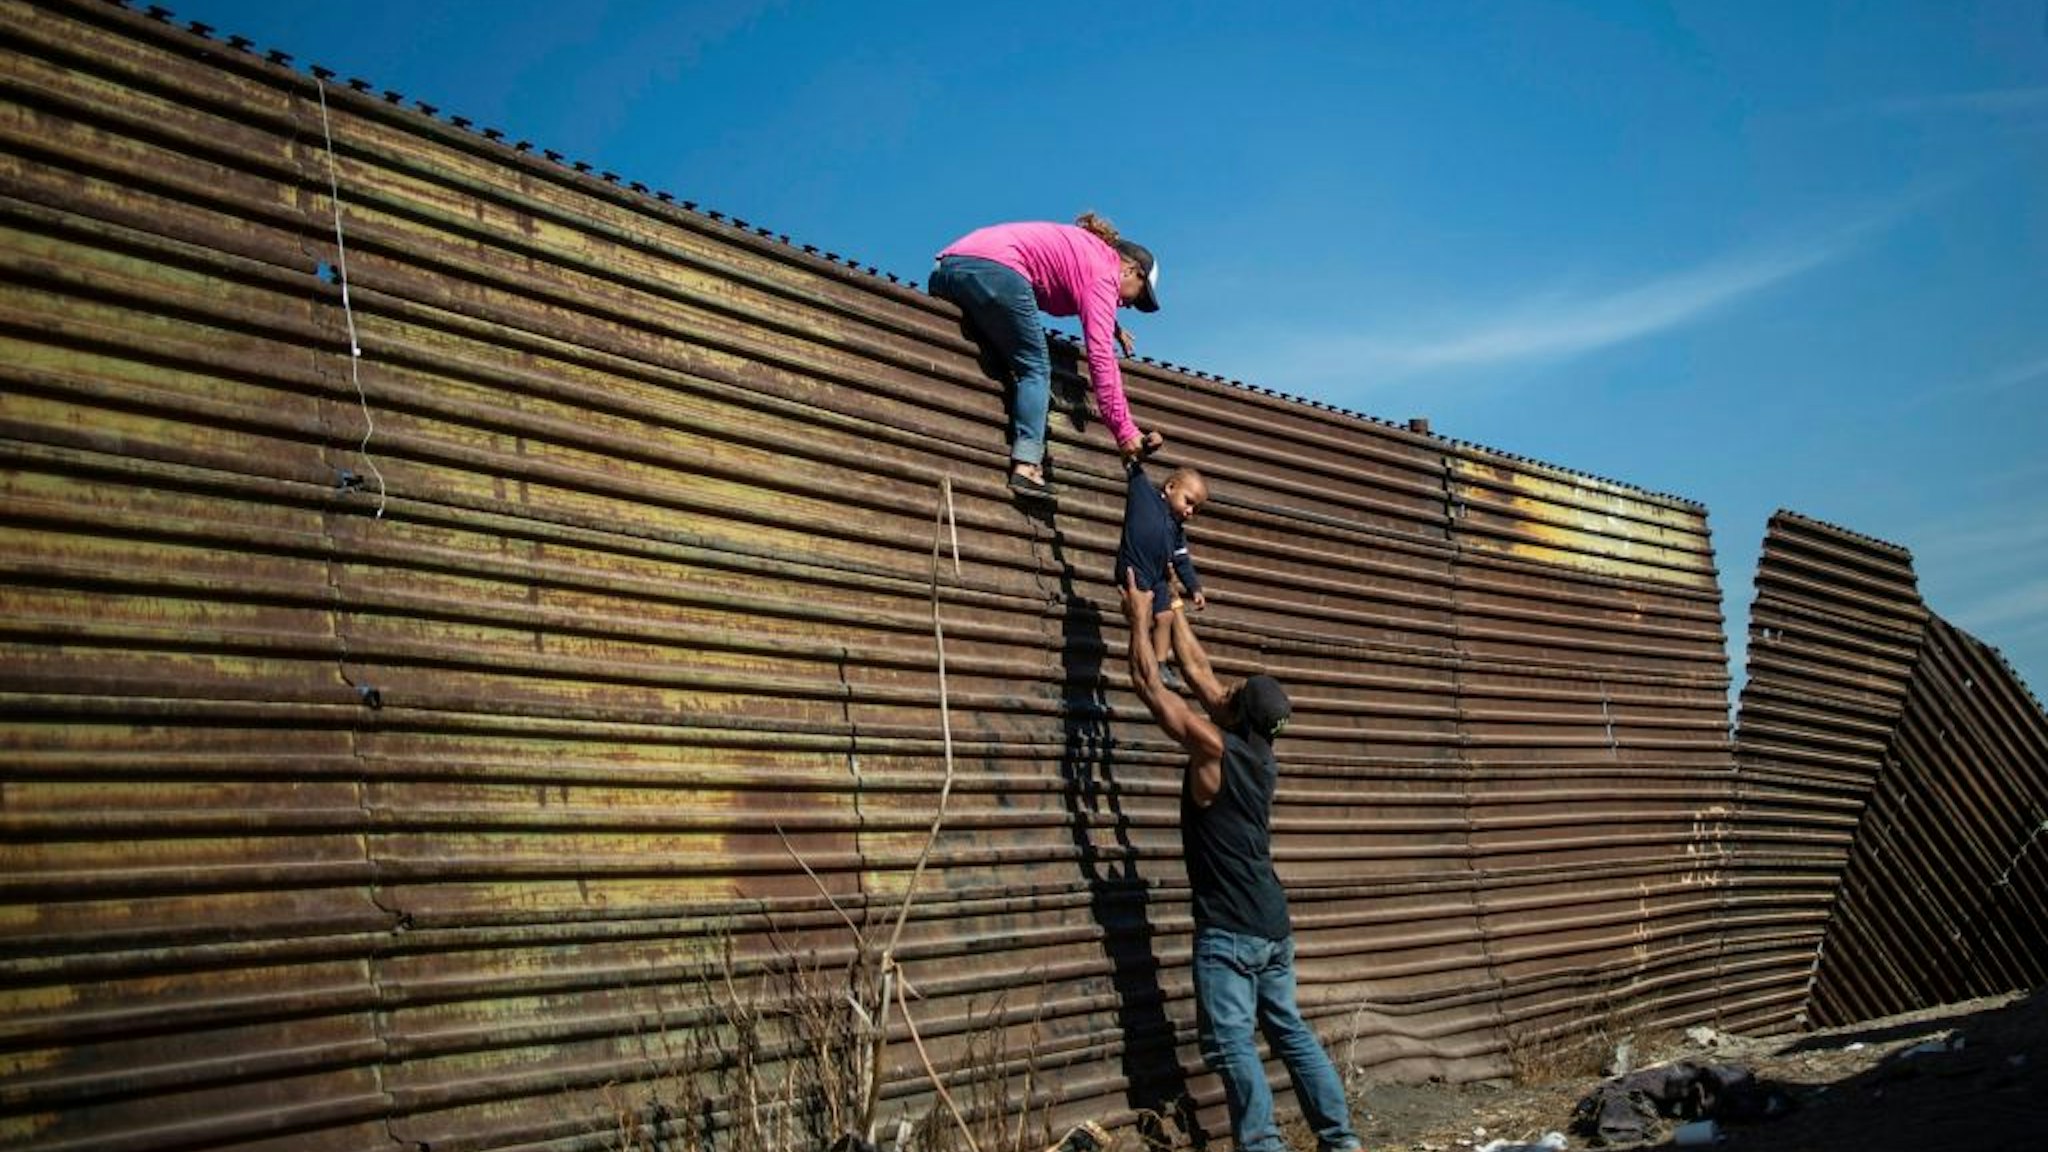 TOPSHOT - A group of Central American migrants climb the border fence between Mexico and the United States, near El Chaparral border crossing, in Tijuana, Baja California State, Mexico, on November 25, 2018. - Hundreds of migrants attempted to storm a border fence separating Mexico from the US on Sunday amid mounting fears they will be kept in Mexico while their applications for a asylum are processed. An AFP photographer said the migrants broke away from a peaceful march at a border bridge and tried to climb over a metal border barrier in the attempt to enter the United States. (Photo by Pedro PARDO / AFP) (Photo by PEDRO PARDO/AFP via Getty Images)